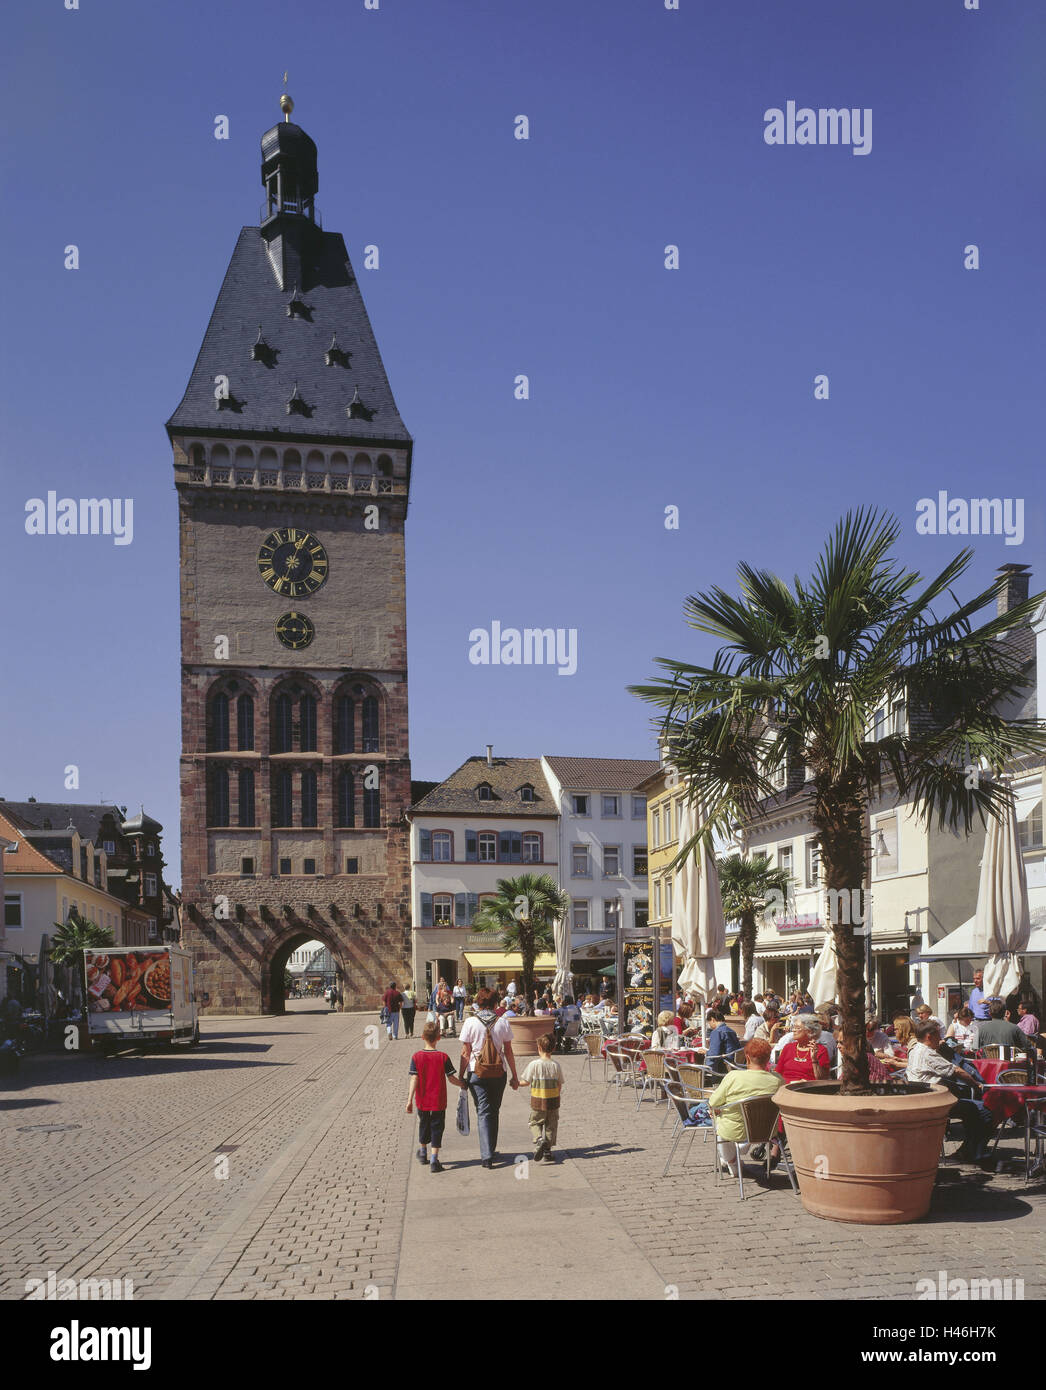 Germany, Rhineland-Palatinate, Speyer, Altpörtel, Maximilianstrasse, cafes, tourists, no model release, town, destination, place of interest, palm, street cafe, pedestrian area, town goal, tower, Middle Ages, medievally, clock, cobblestones, goal, dusk, architecture, historically, people, tourism, Stock Photo